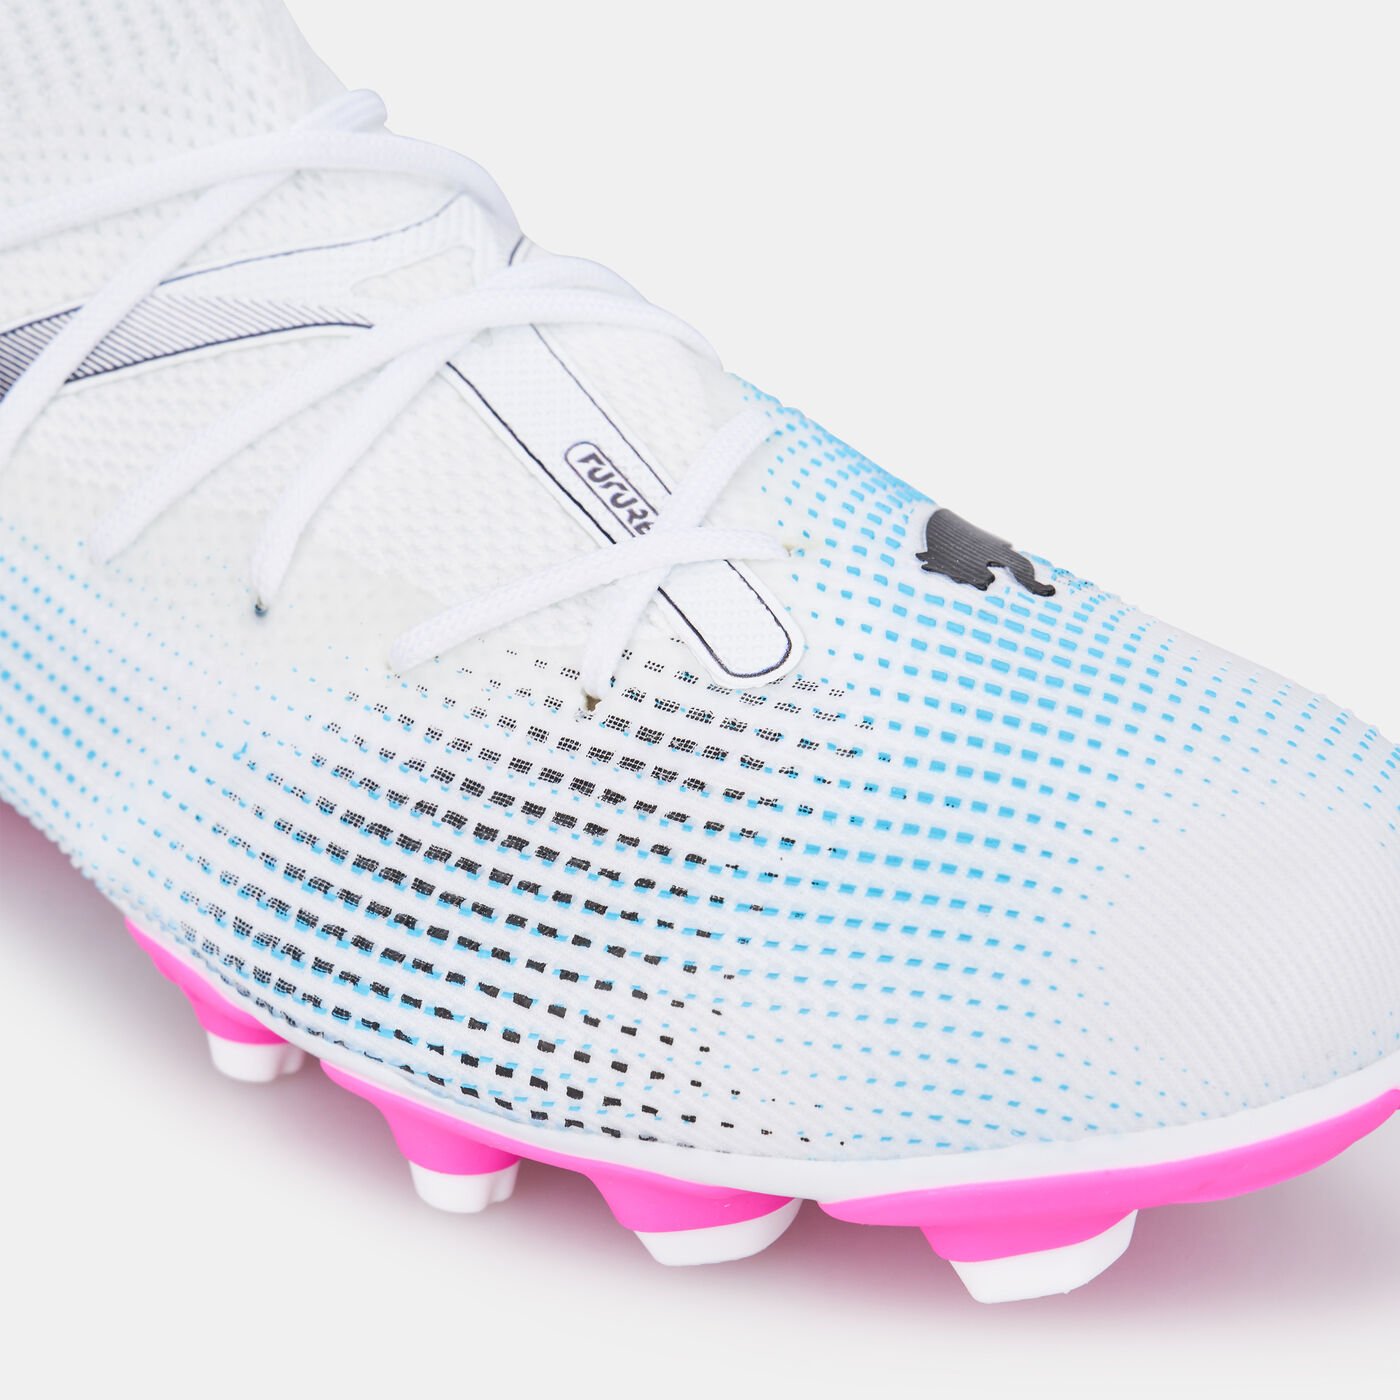 Kids' FUTURE 7 PLAY Firm Ground Football Shoes